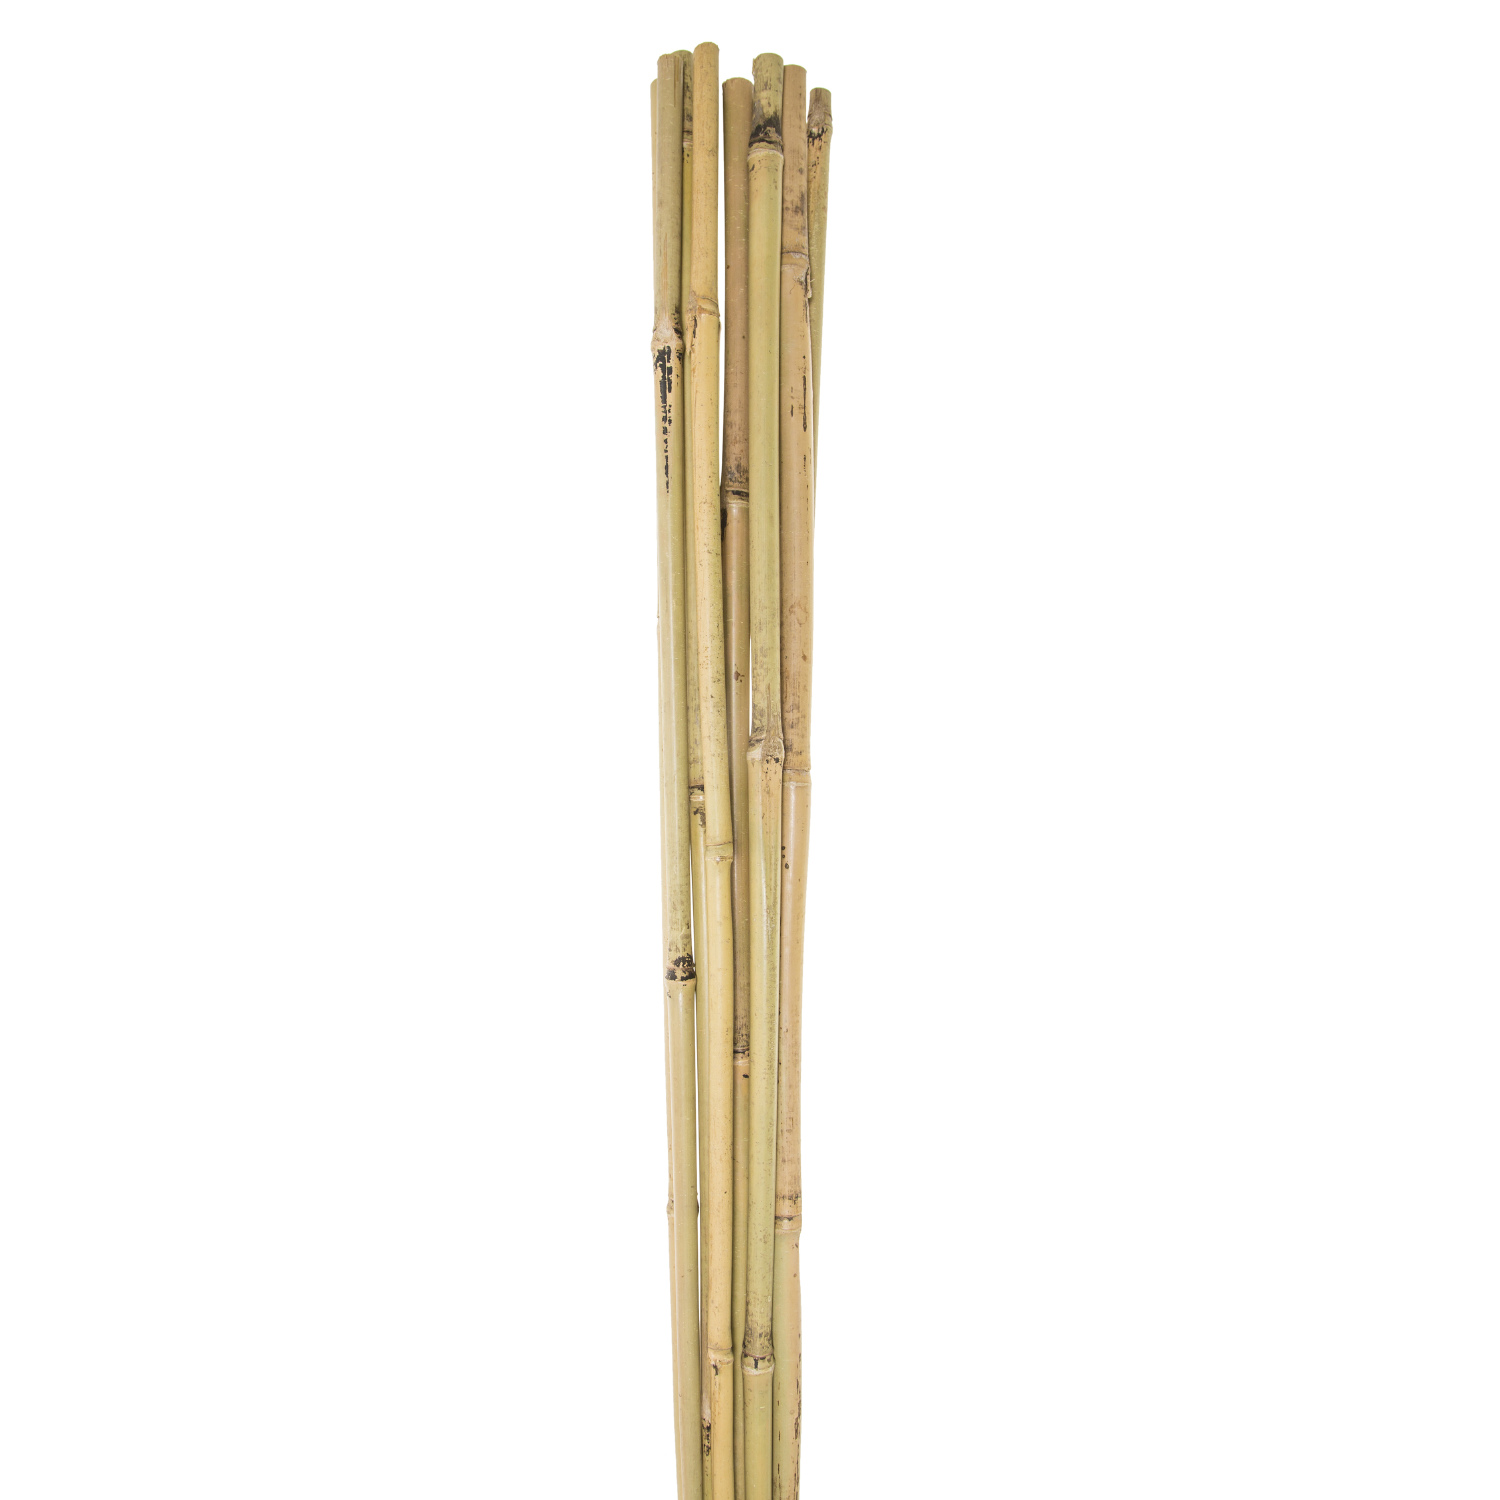 Pack of Bamboo Canes - 6ft Image 2